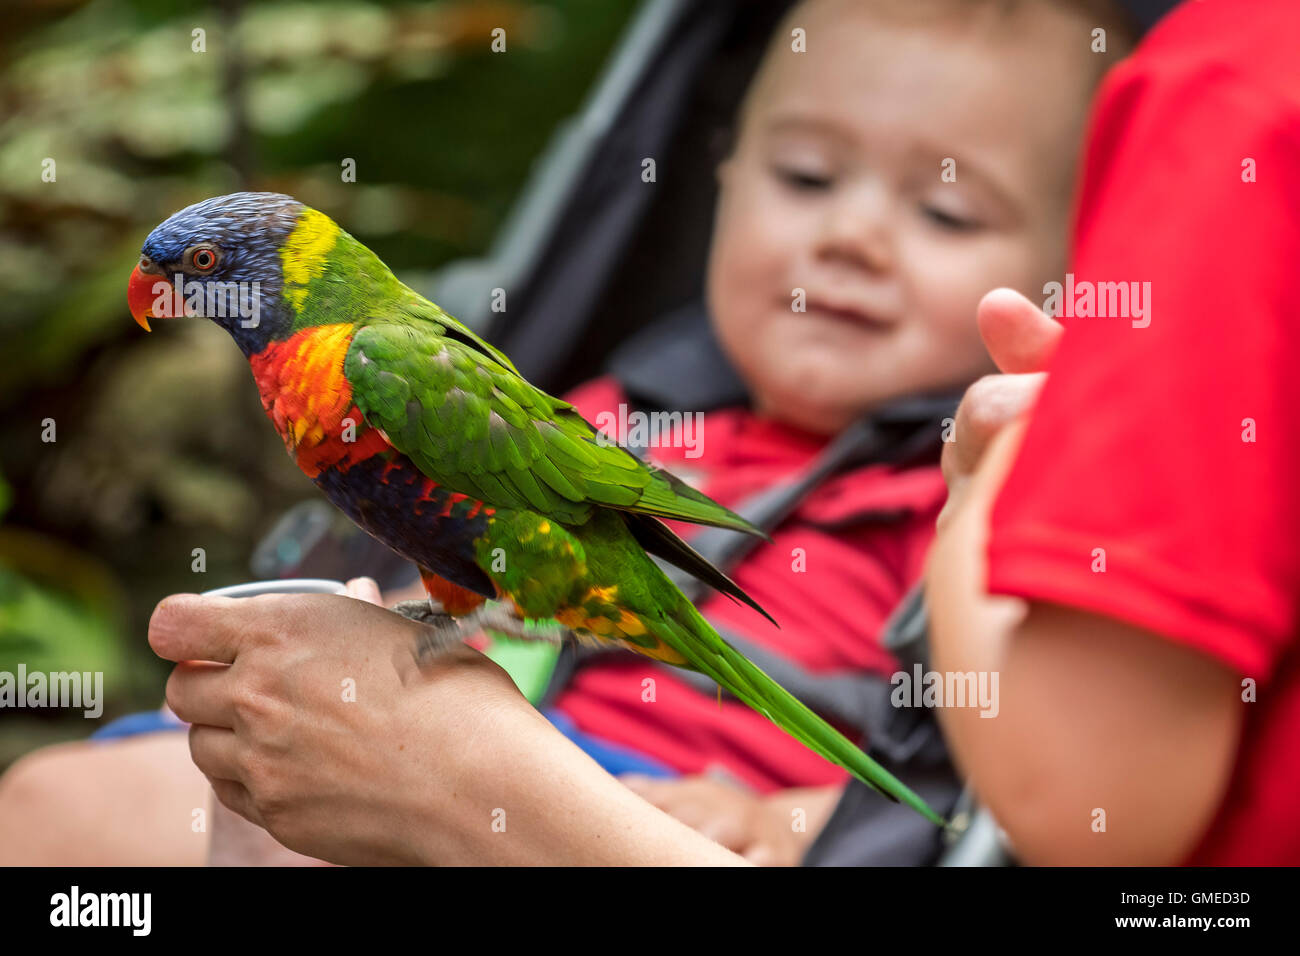 Baby looking at tame rainbow lorikeet / Swainson's Lorikeet - colourful parrot native to Australia - being fed by hand in zoo Stock Photo